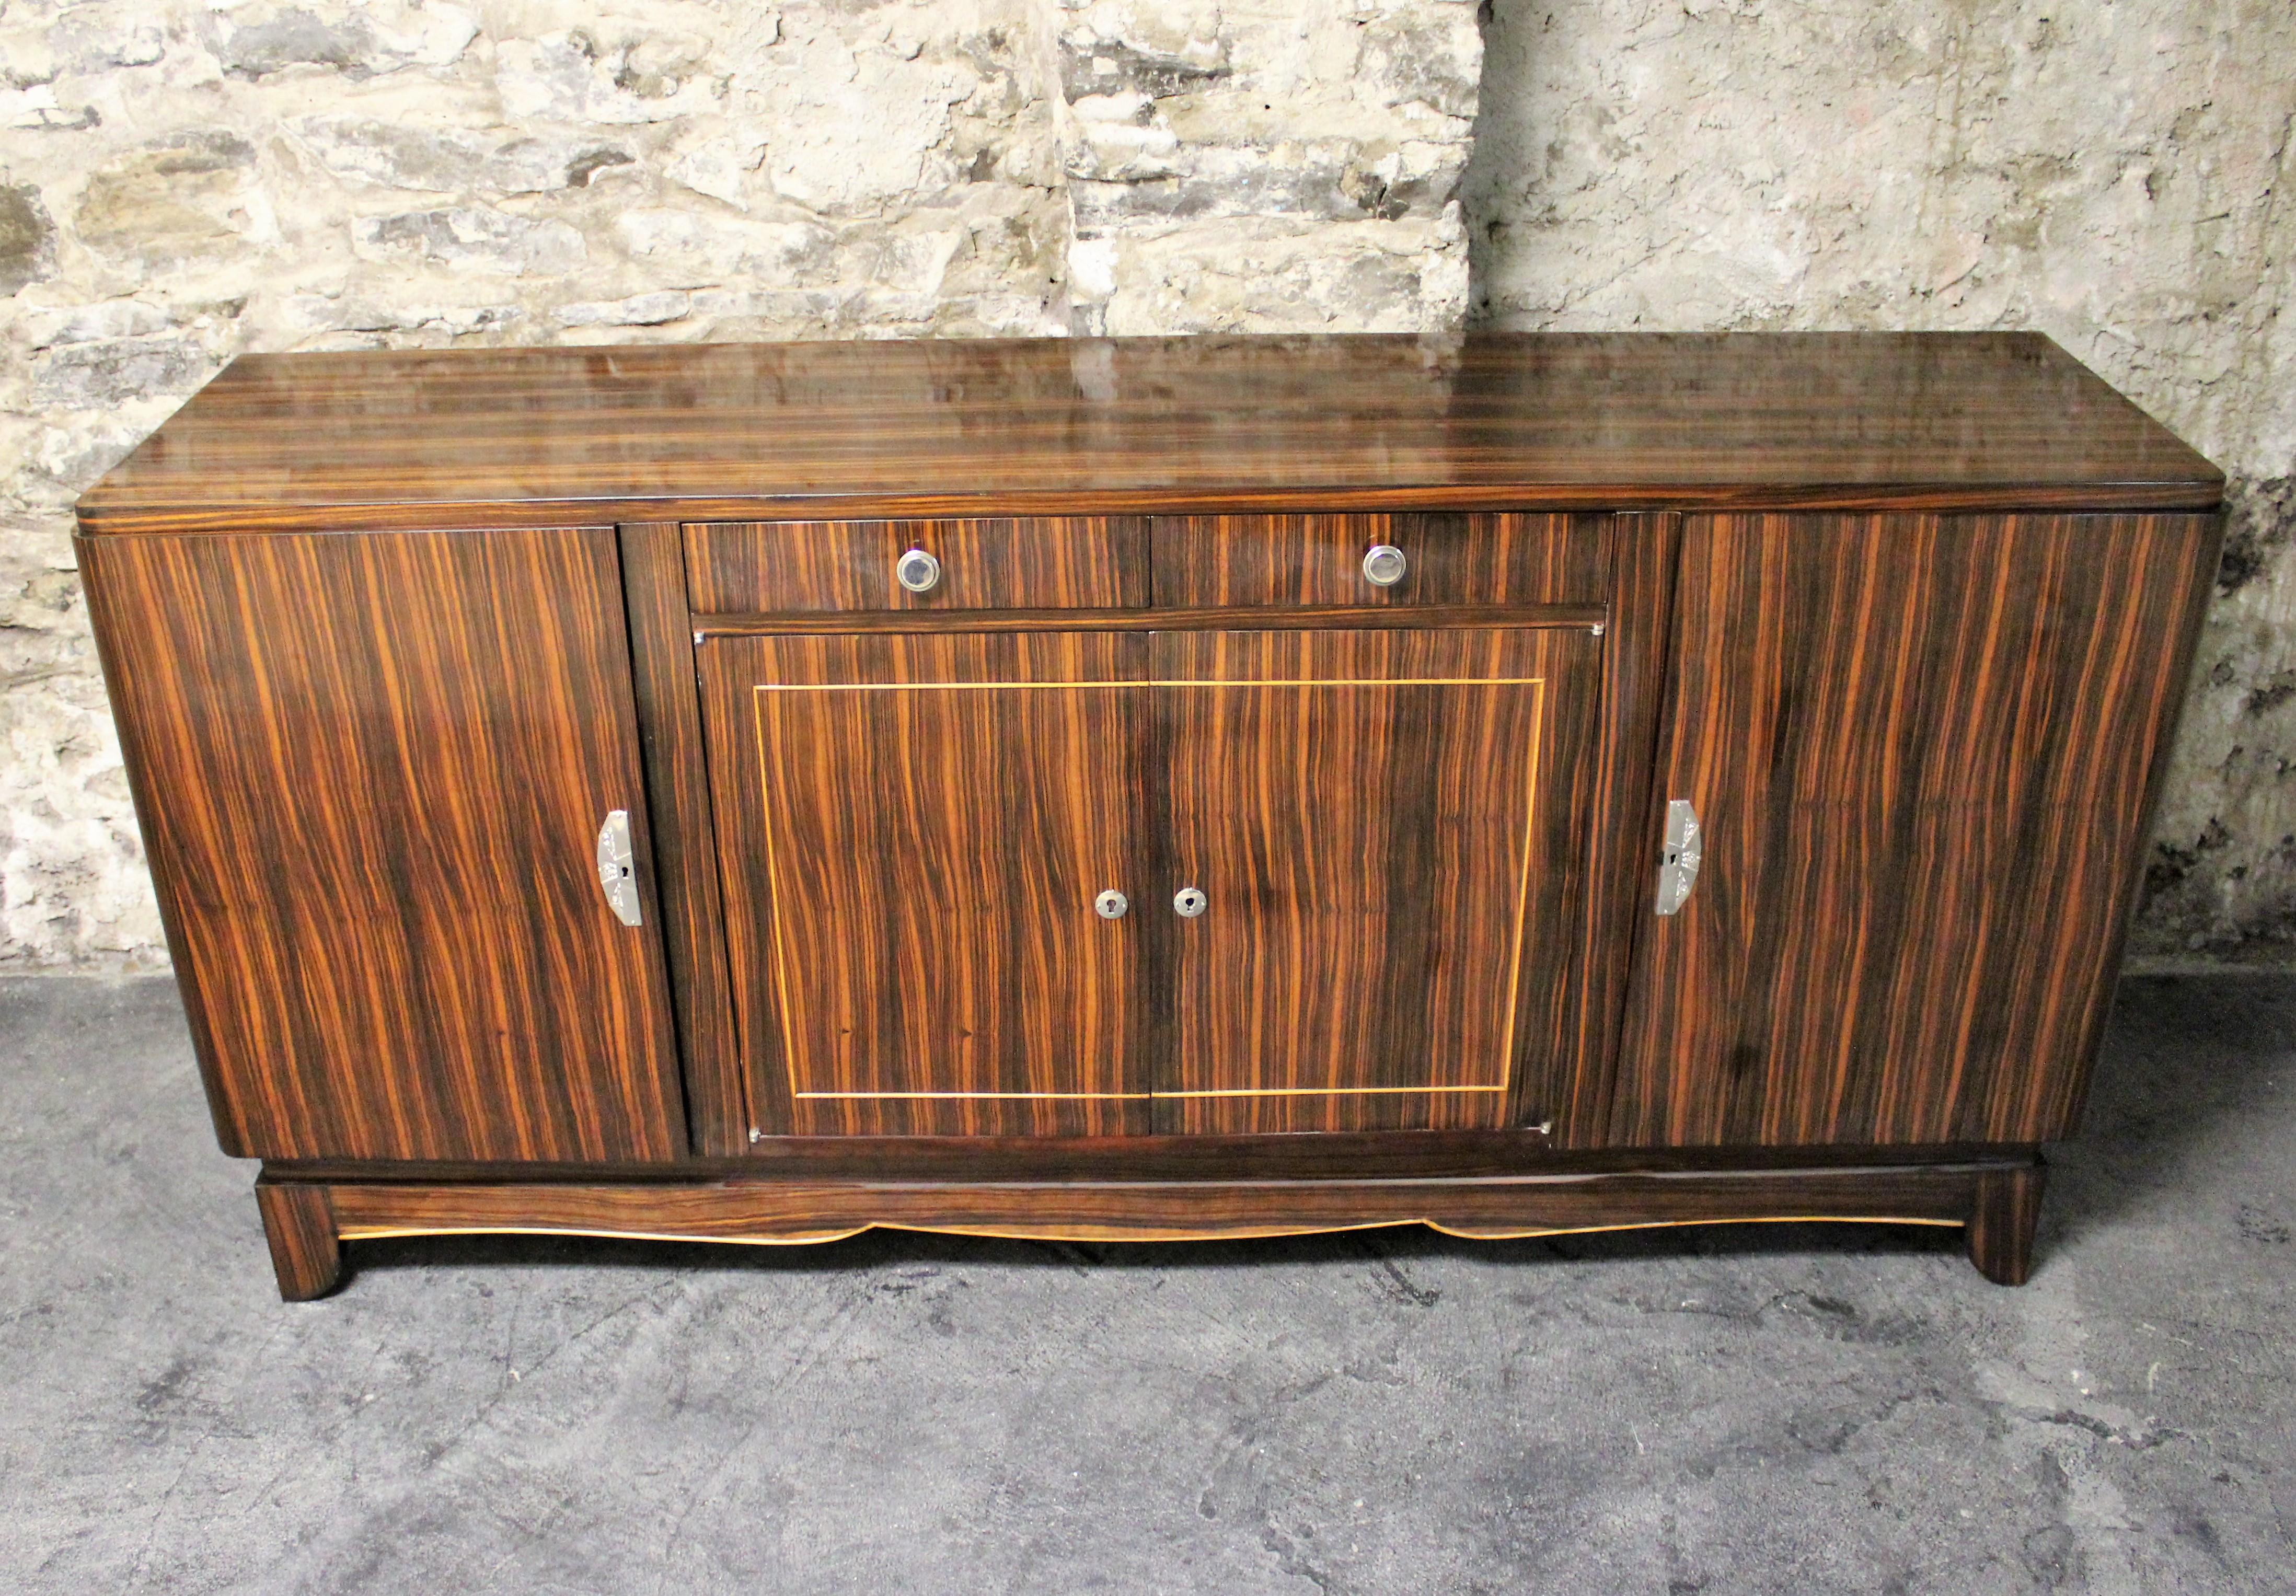 Art Deco Macassar ebony sideboard in the manner of Émile-Jacques Ruhlmann. This four-door and two drawer credenza is elegantly designed with chrome hardware and beautiful rich wood grains.